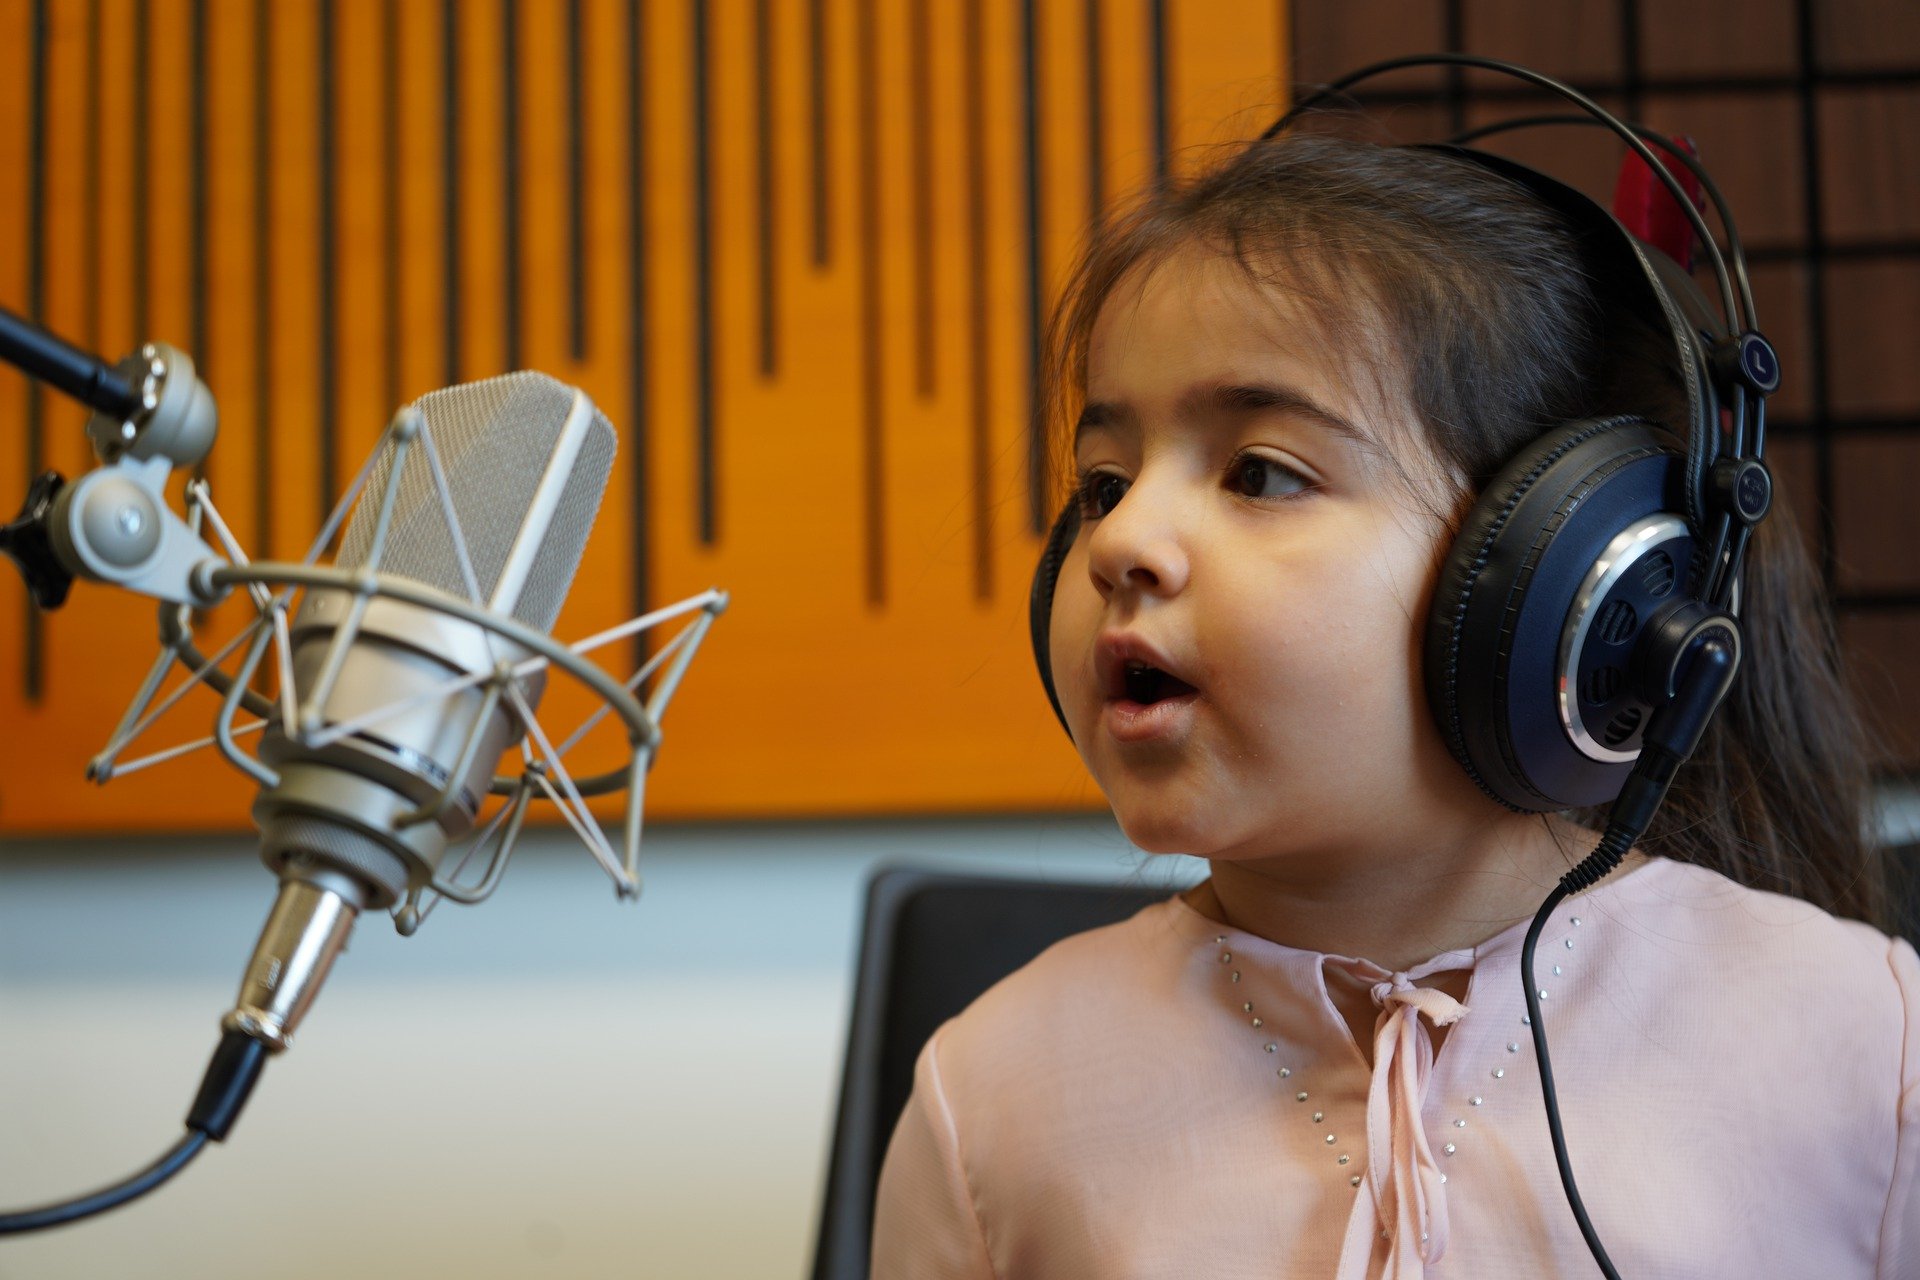 10 Questions To Ask Your Child to Record a Helpful Listening “Tape”